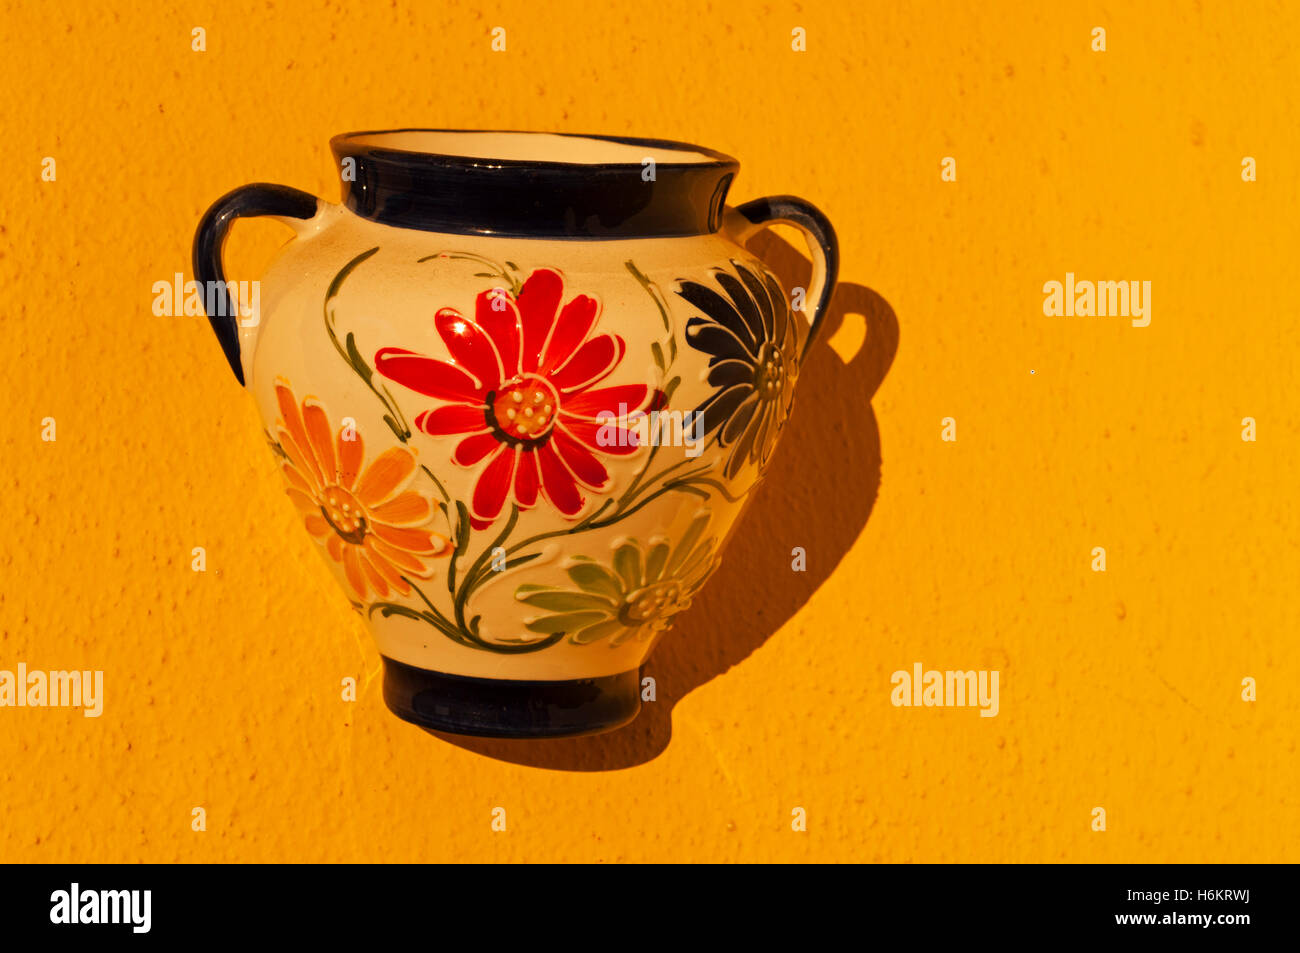 Typical Andalucian wall-mounted flowerpot. Stock Photo